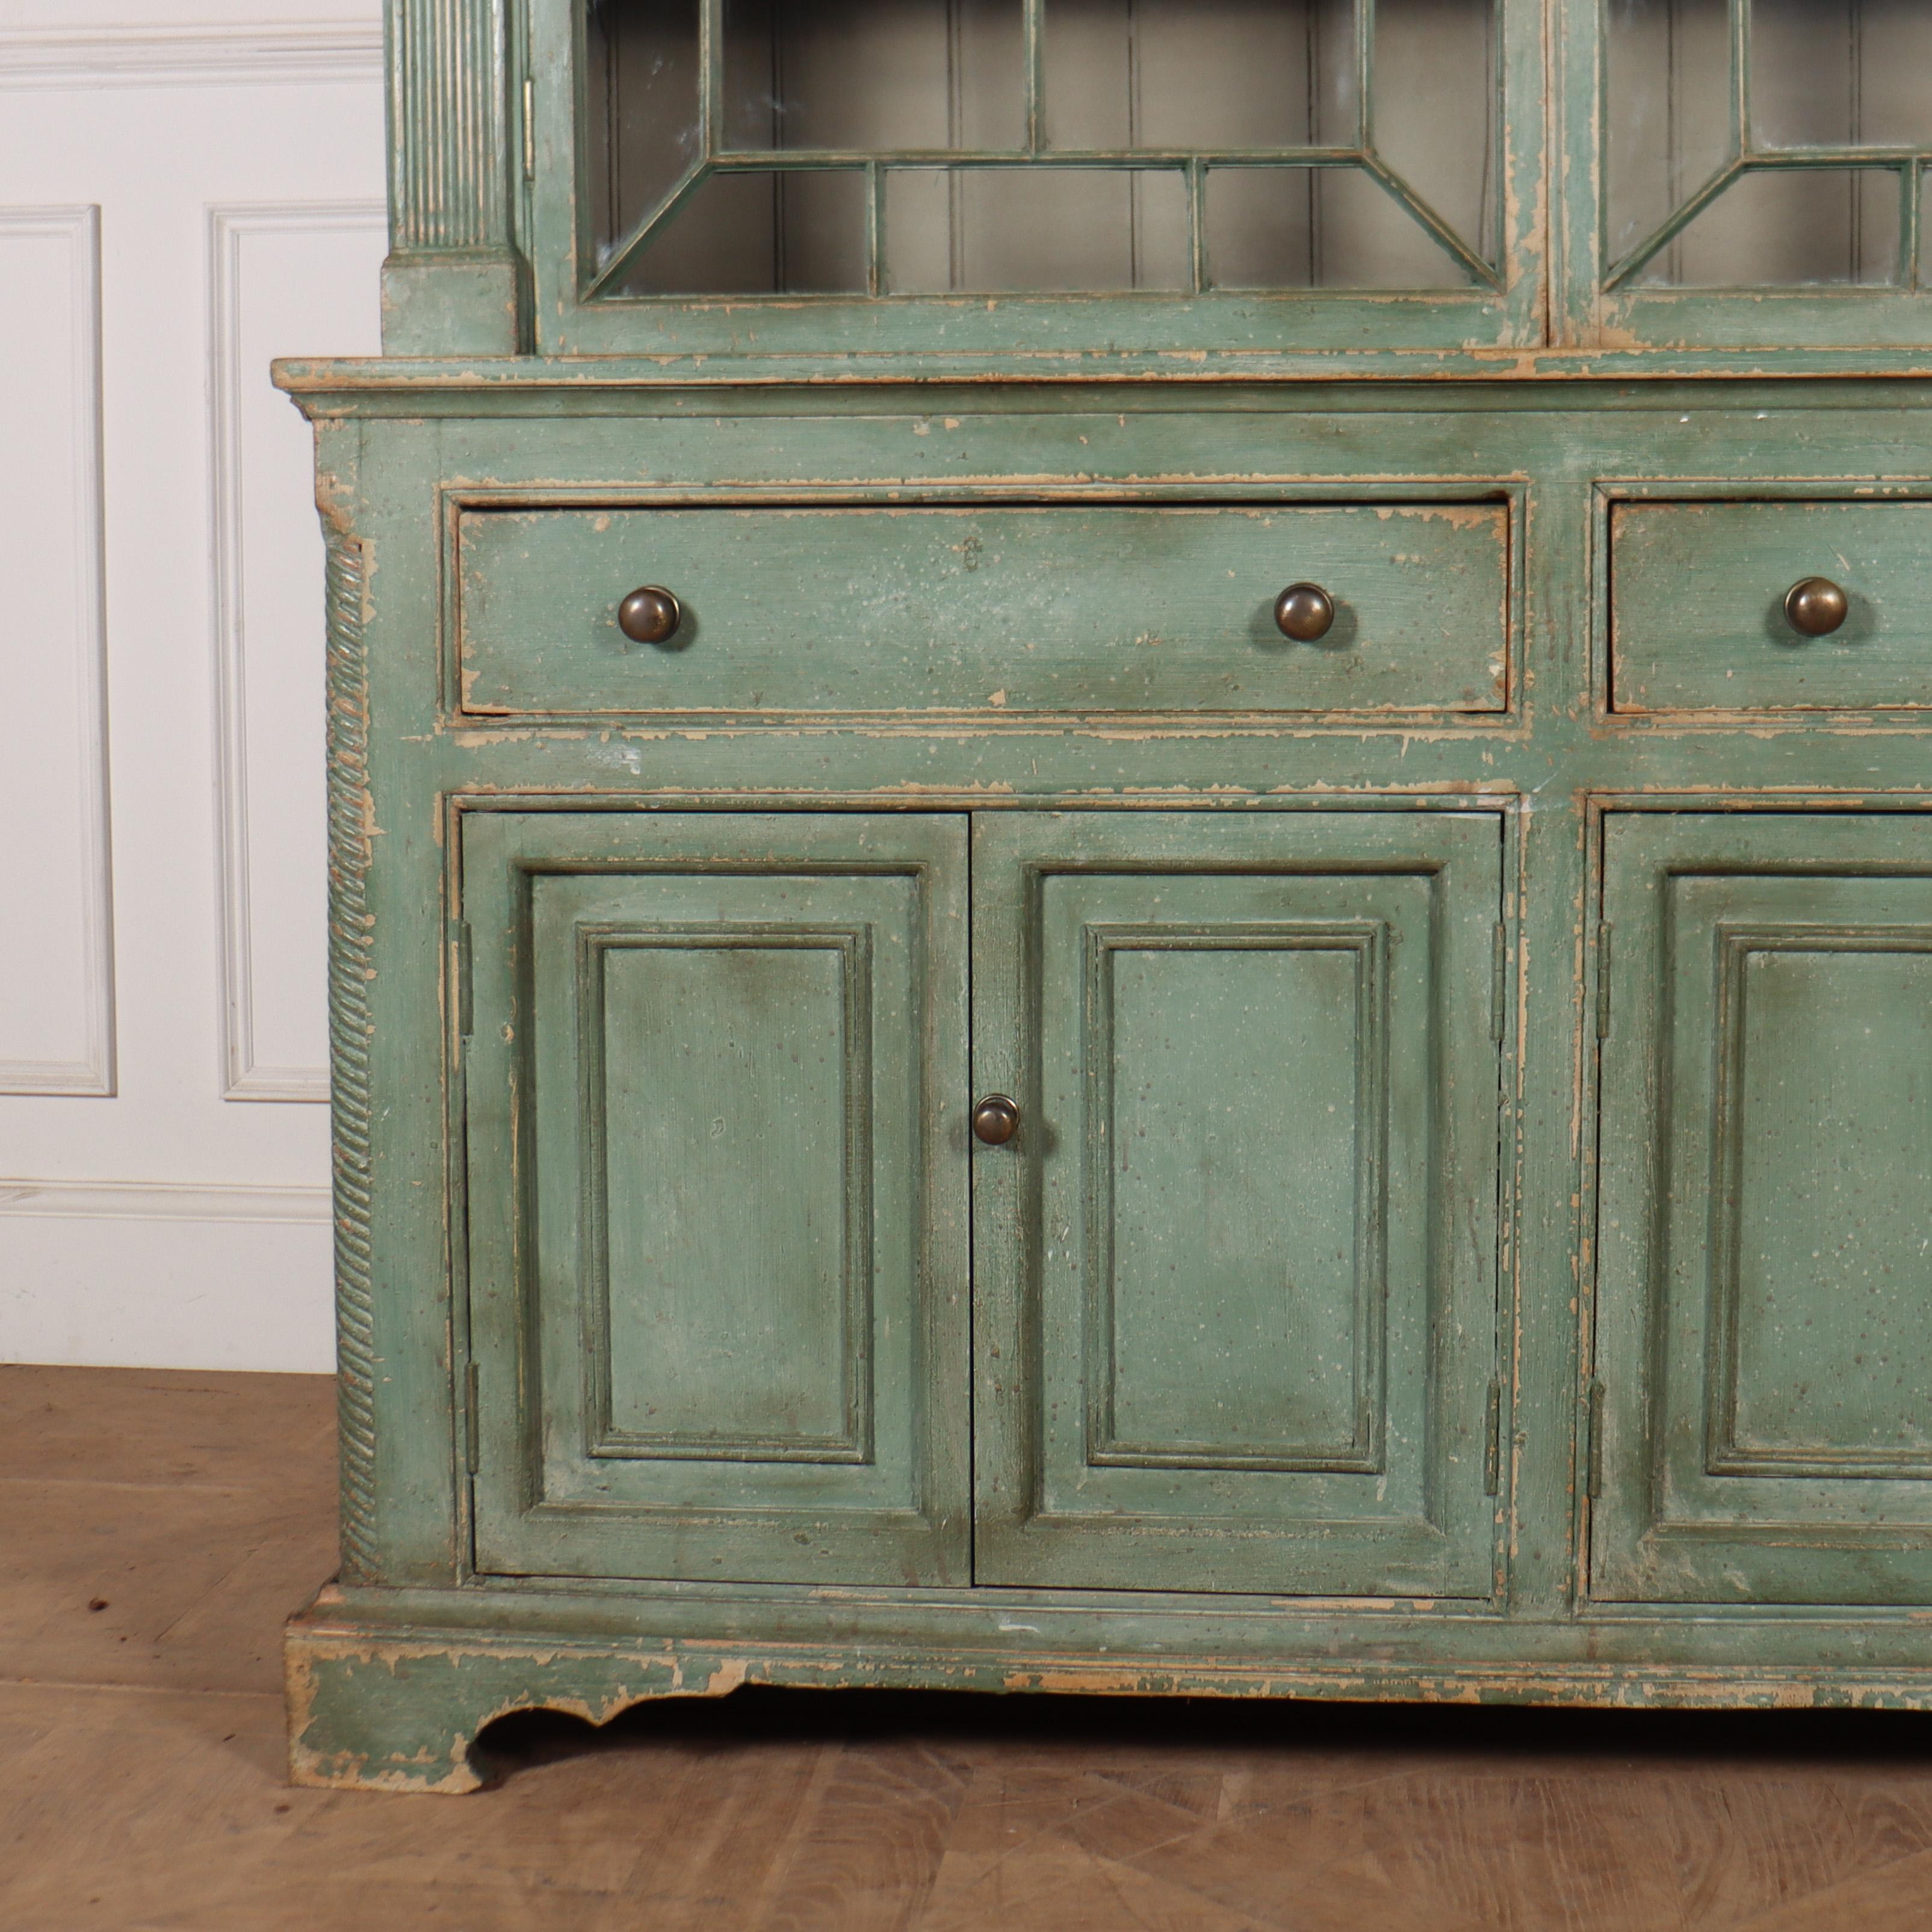 Pretty early 19th C West Country glazed and painted pine dresser. 1820.

Shelf in top section is 30cm.

Reference: 8121

Dimensions
63.5 inches (161 cms) Wide
20 inches (51 cms) Deep
80 inches (203 cms) High